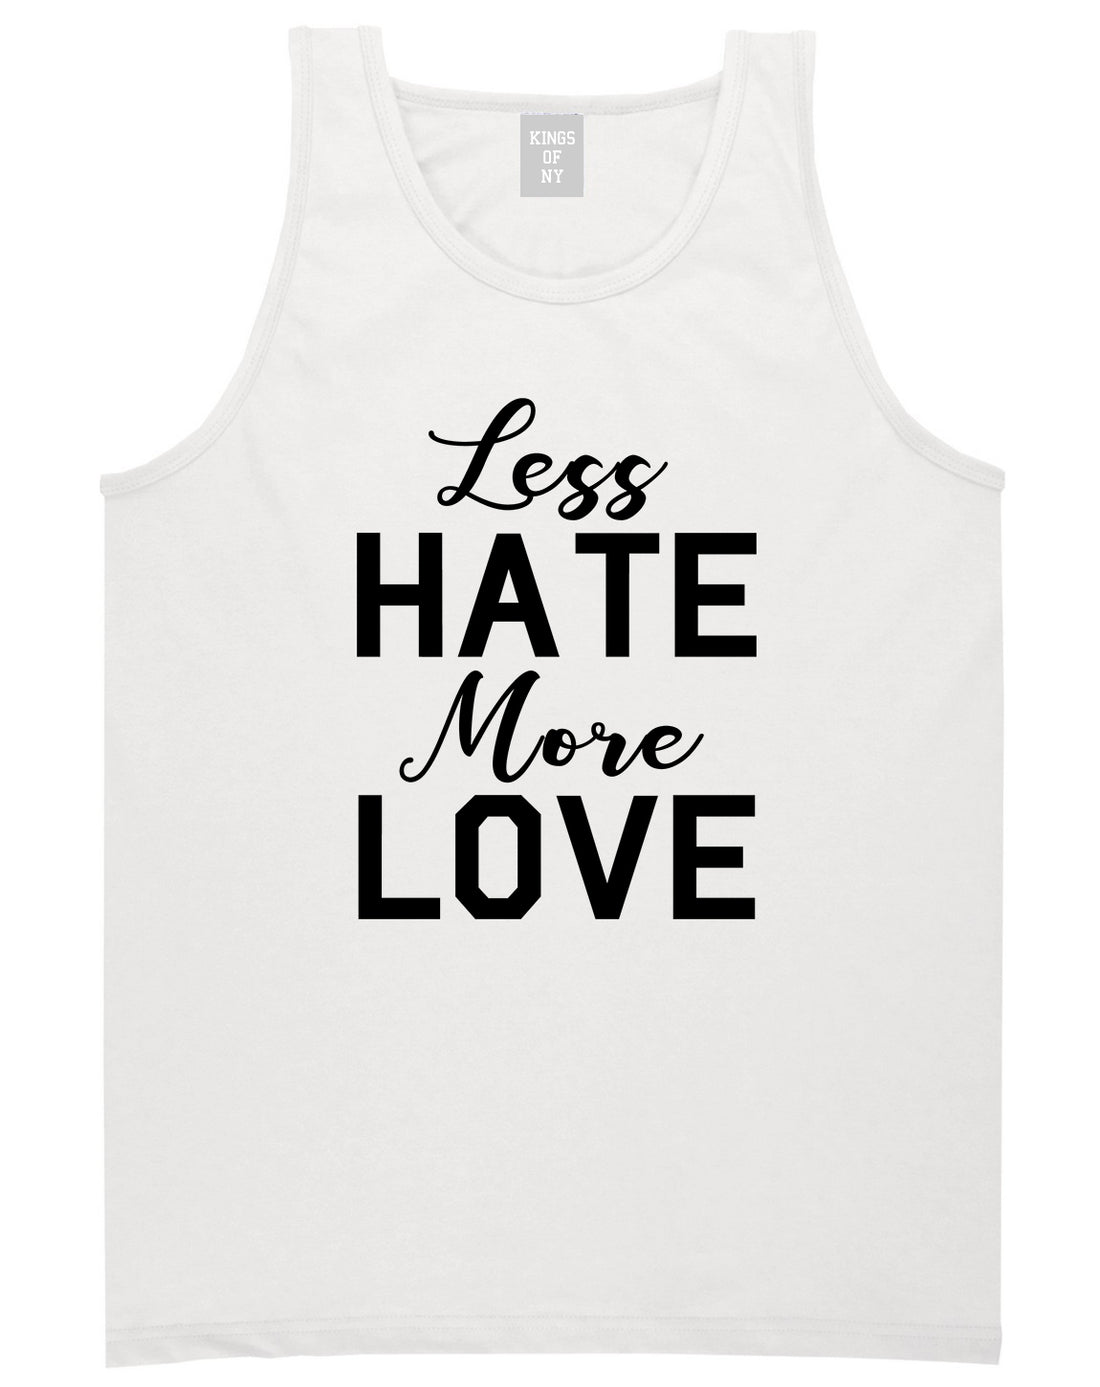 Less Hate More Love Mens Tank Top Shirt White by Kings Of NY